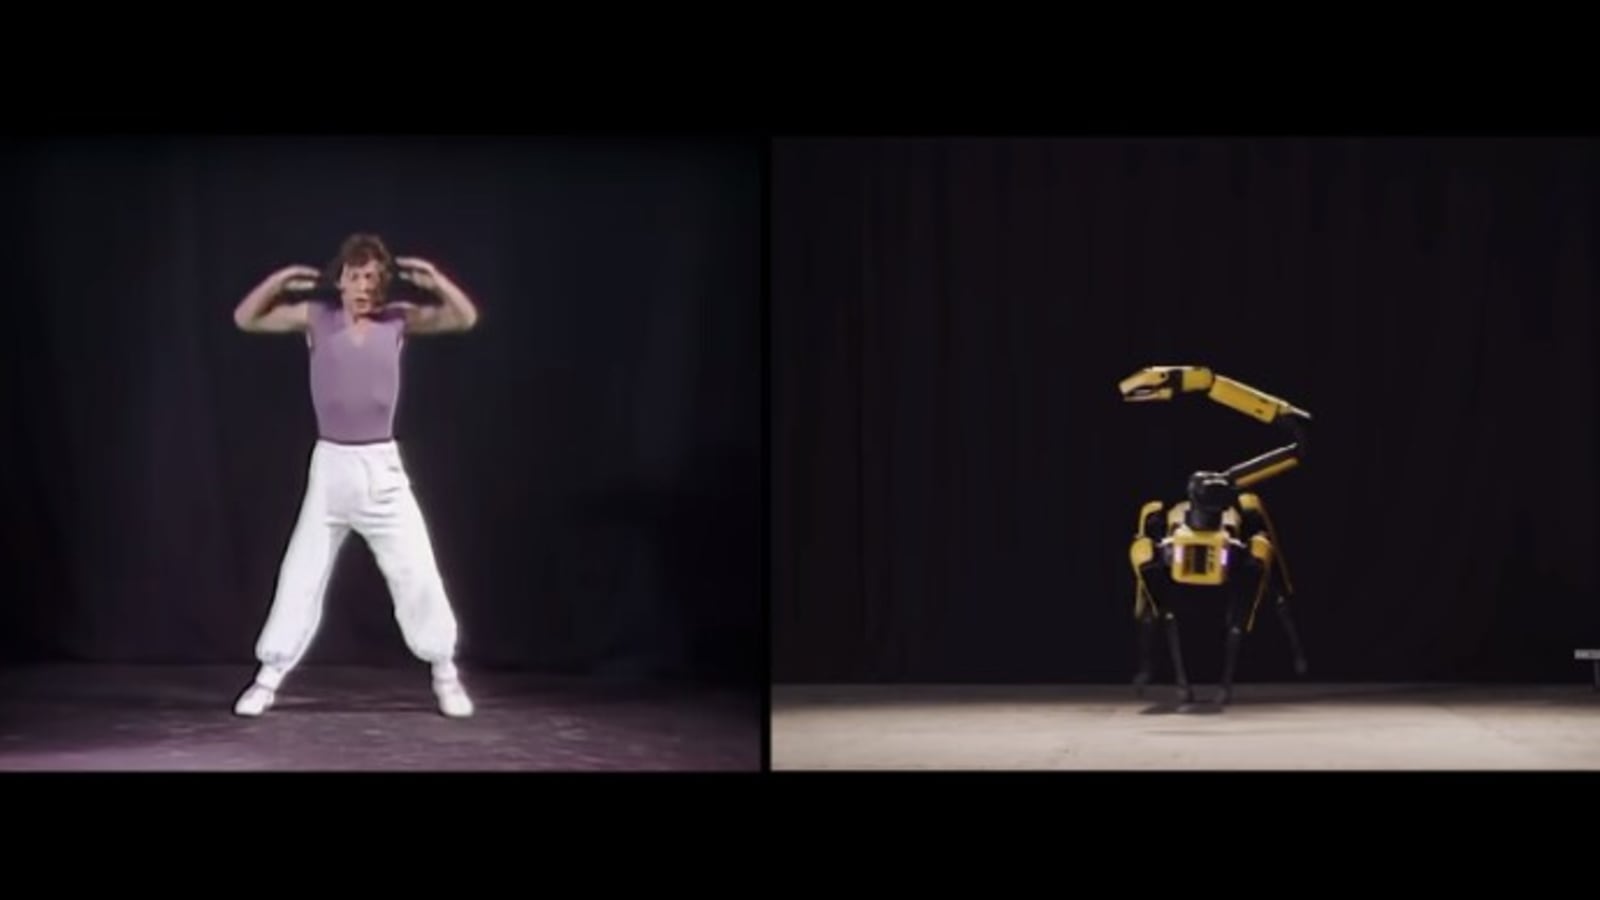 Robot imitates Mick Jagger's iconic dance moves from 1981 music video. Watch